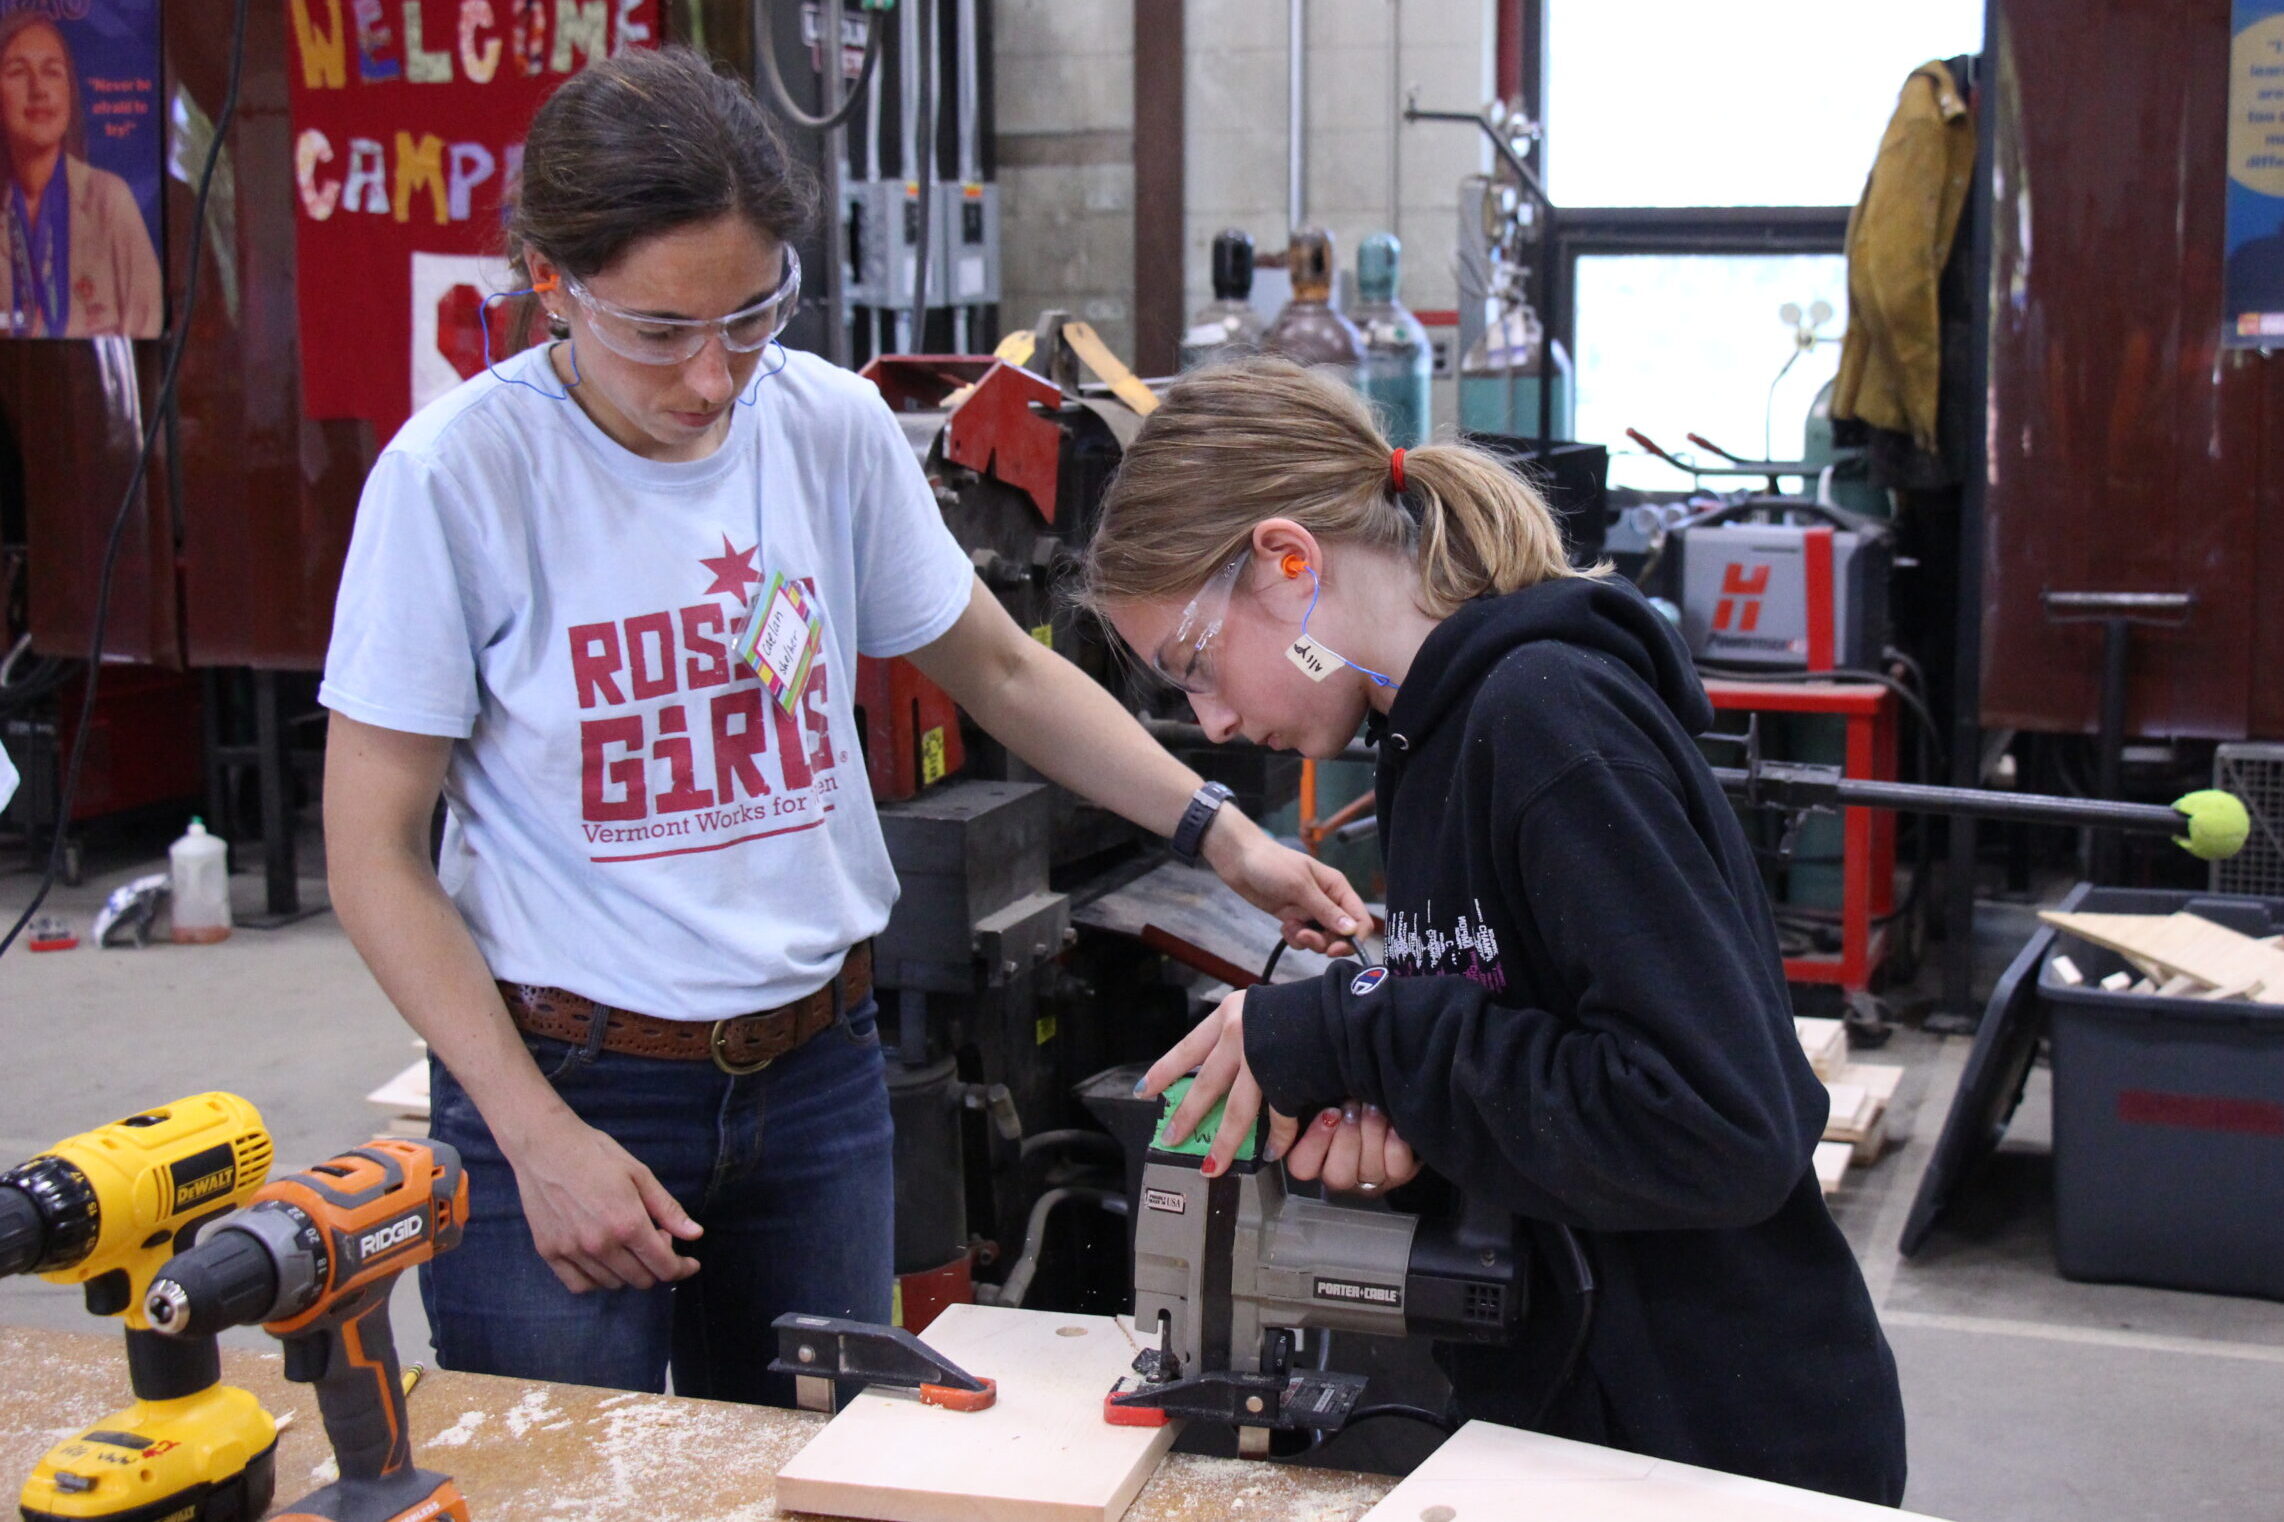 A Rosie's Girls camper uses a jig saw under the supervision of a Vermont Works for Women staff member.